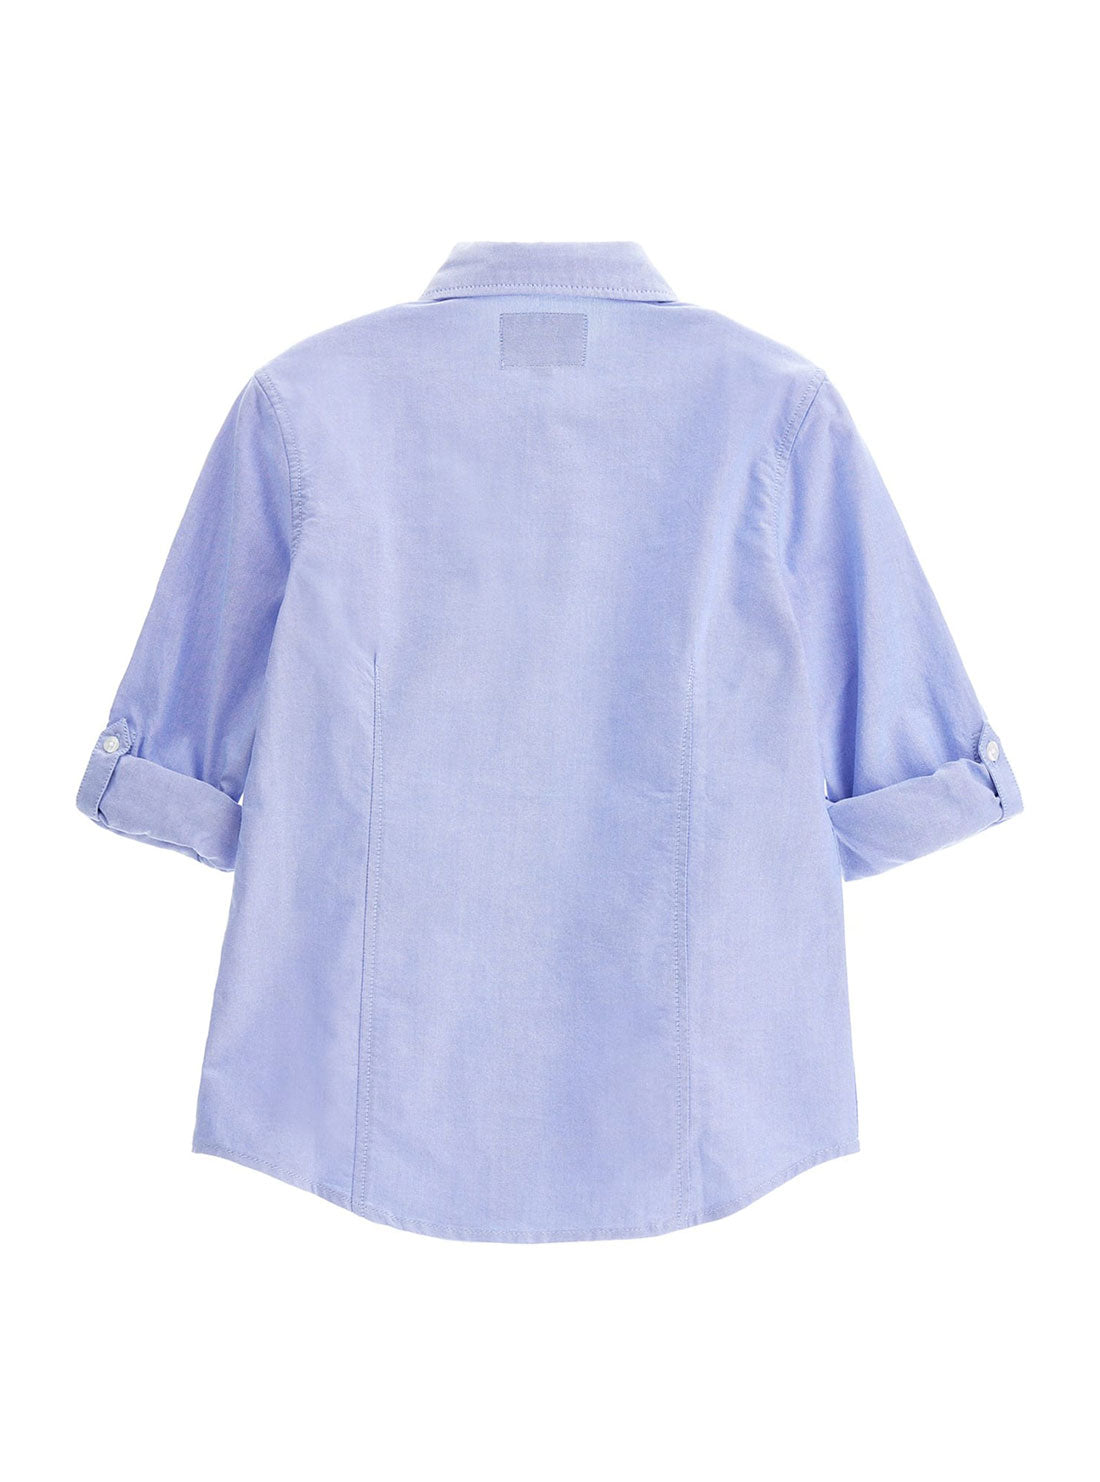 GUESS GUESS Blue Oxford Long Sleeve Shirt (7-16) back view